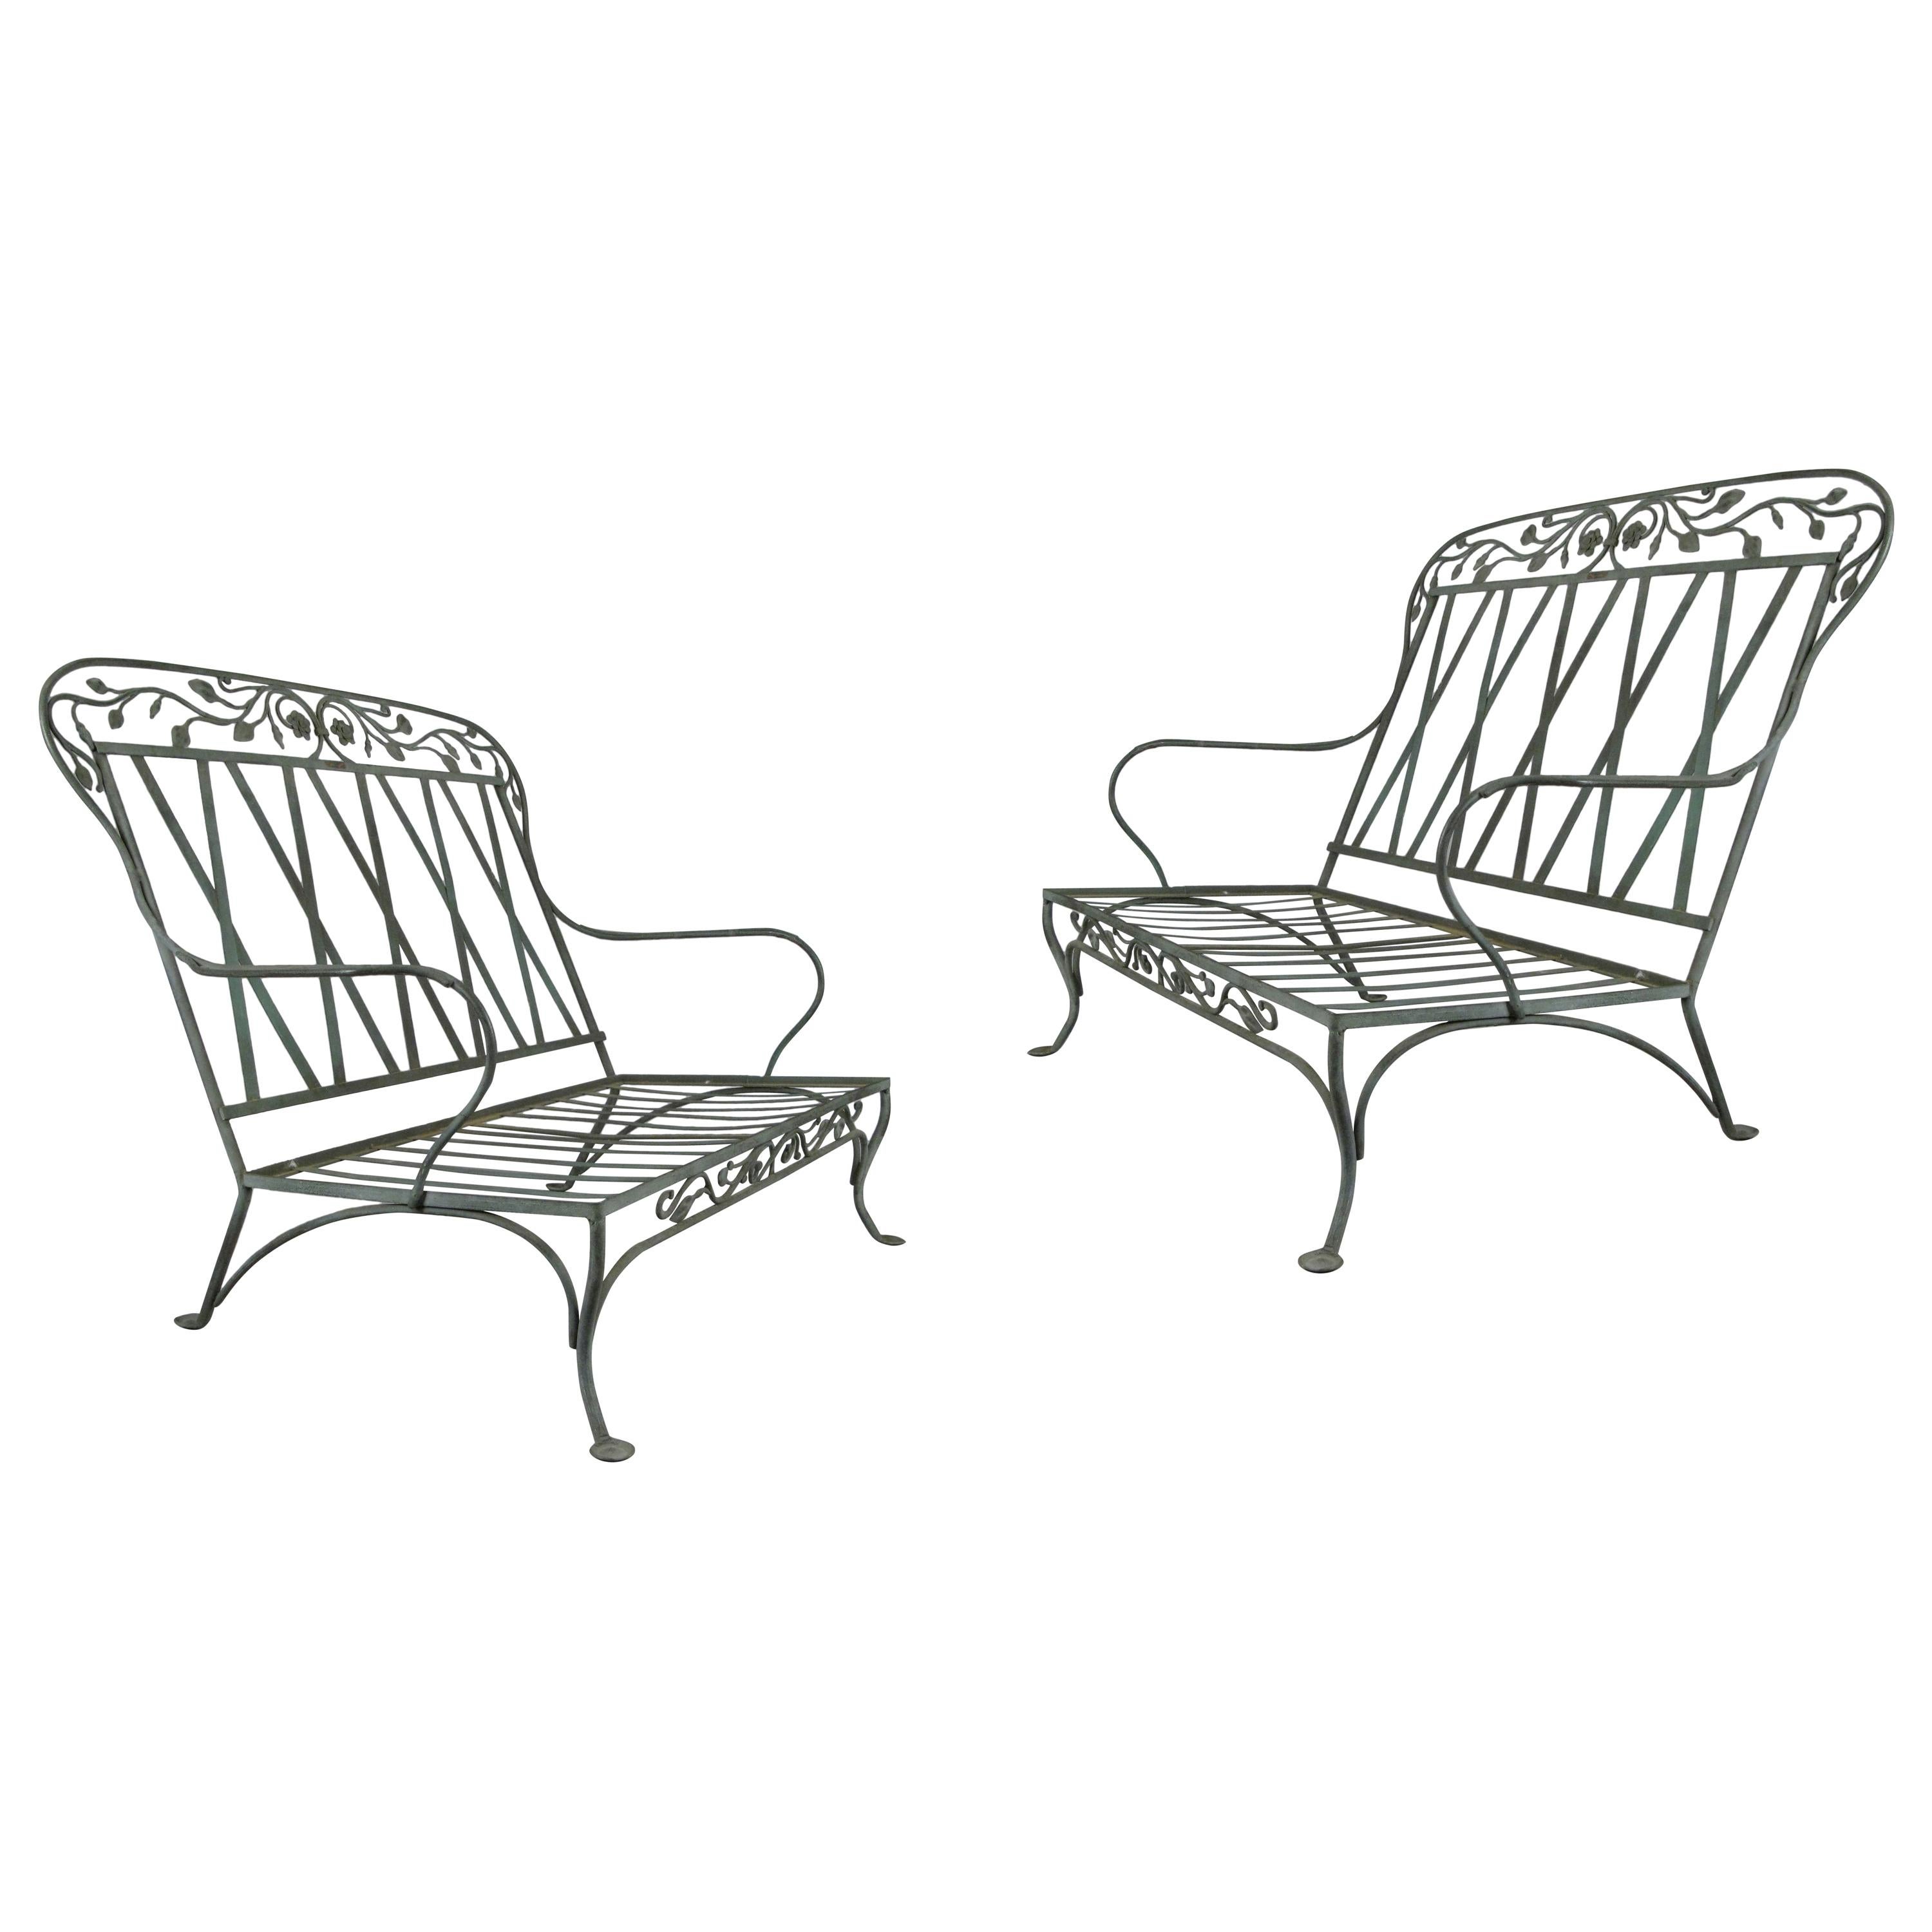 Pair of Wrought Iron Settees by Salterini, circa 1950